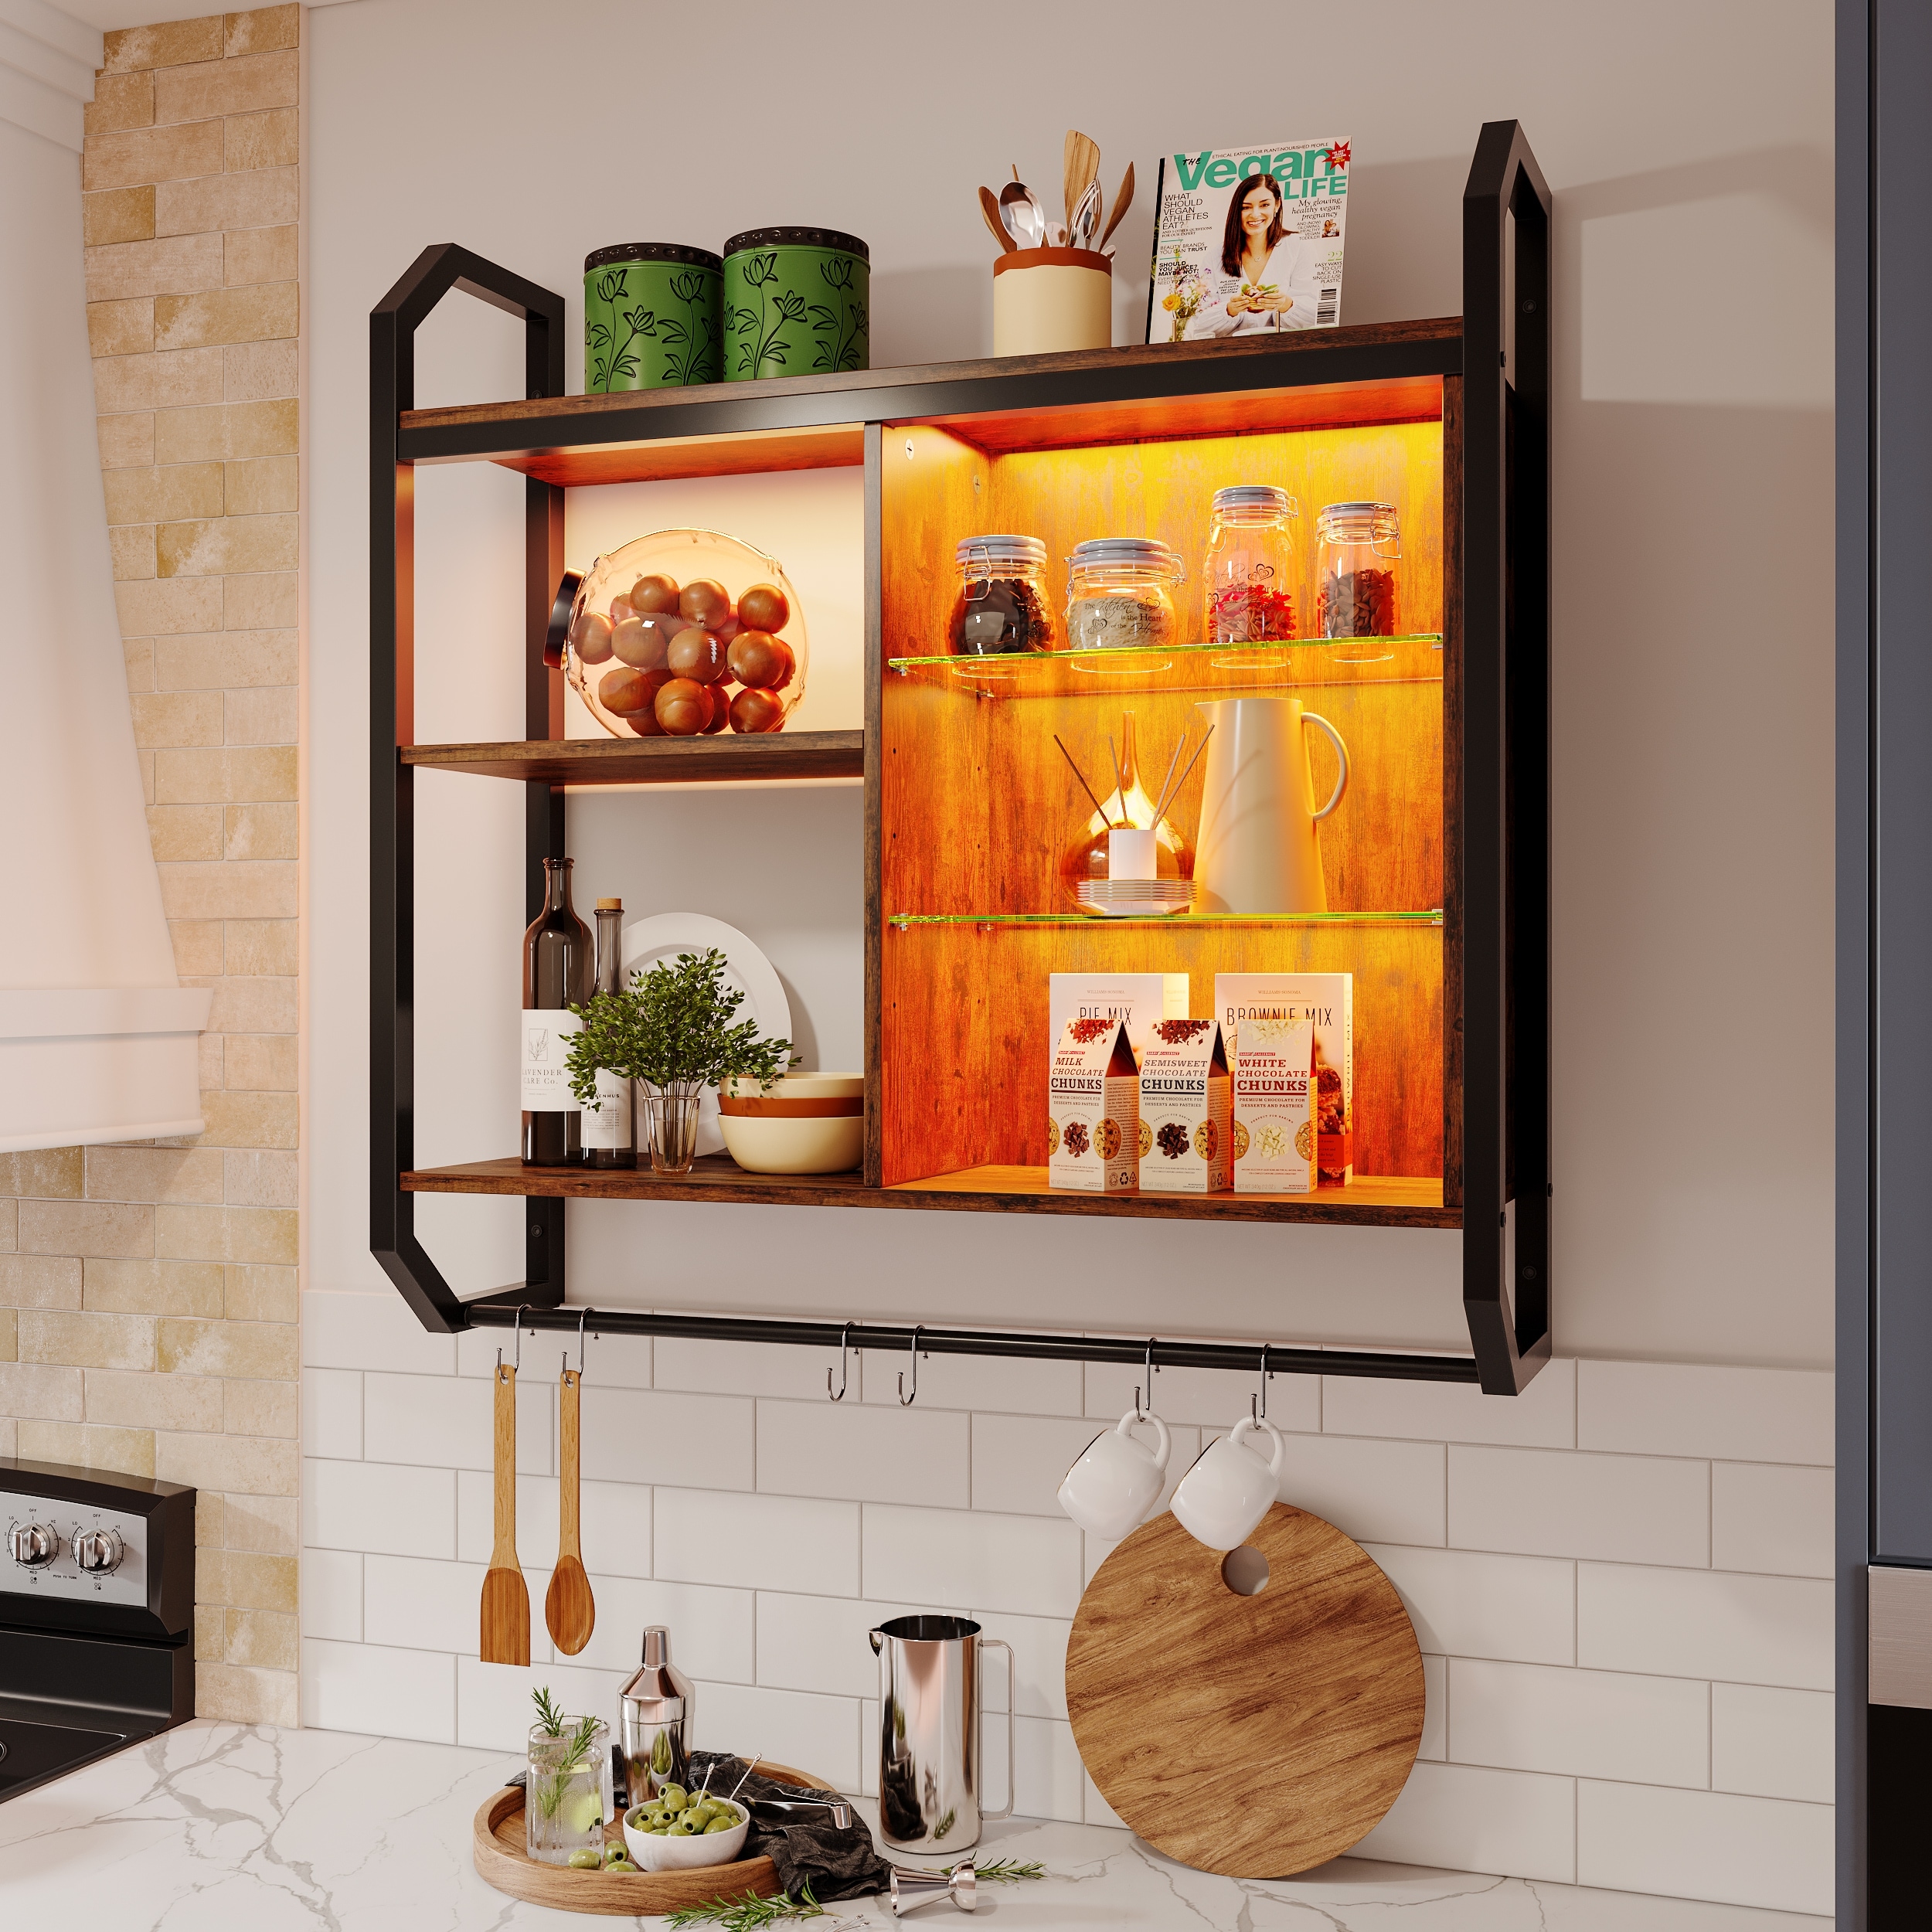 https://ak1.ostkcdn.com/images/products/is/images/direct/8bdba6ffda71b835a345a1b01b12eec26f900d1d/Floating-Shelves-with-LED-and-Towel-Bar-Industrial-Wall-Shelves.jpg